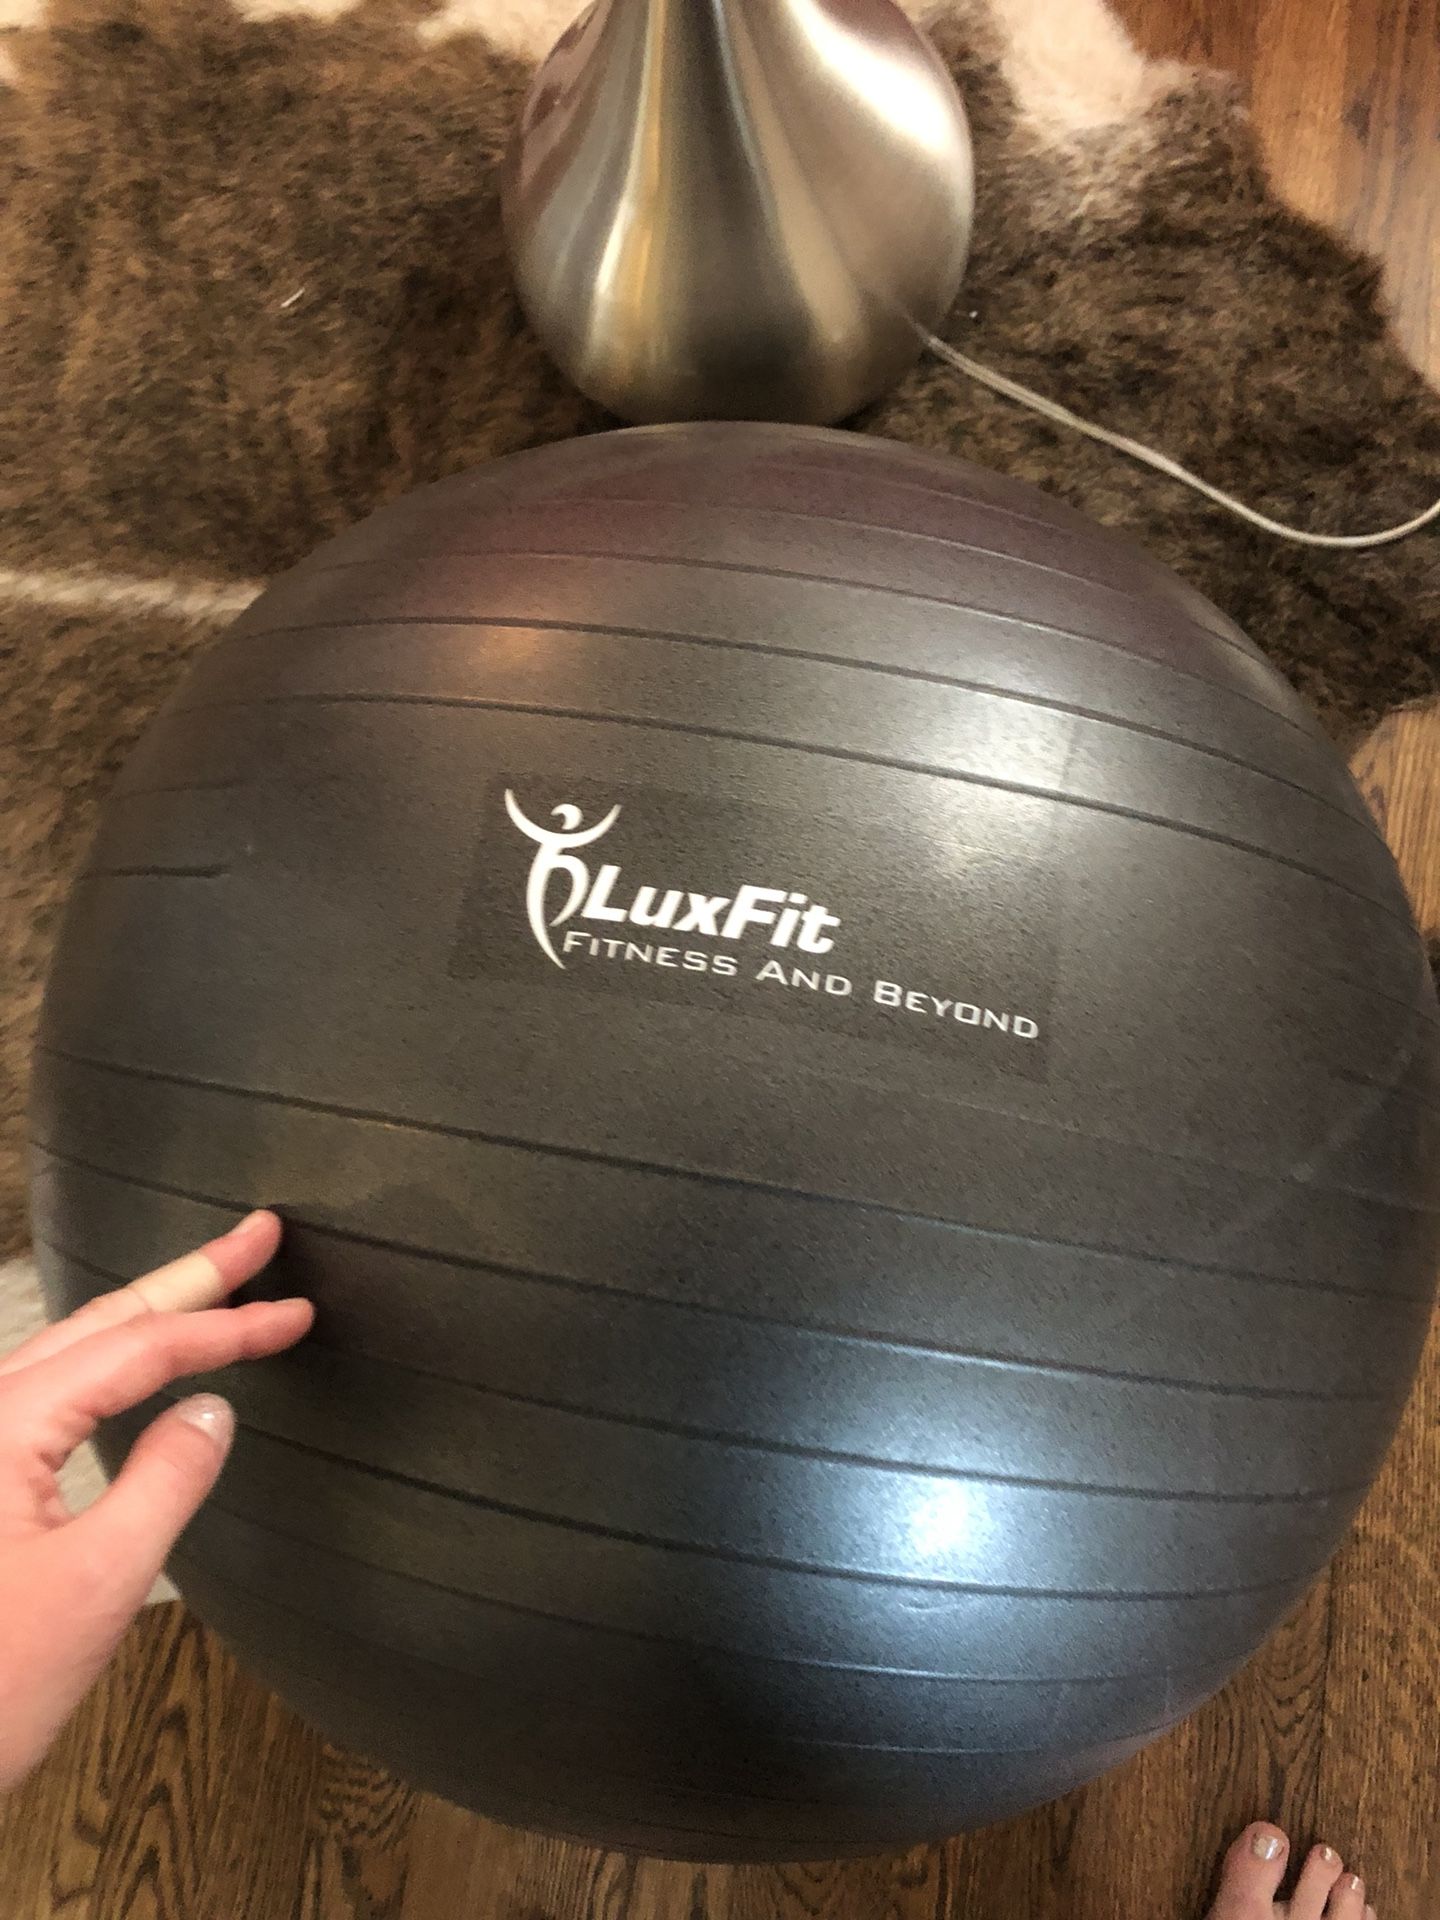 Inflatable exercise ball